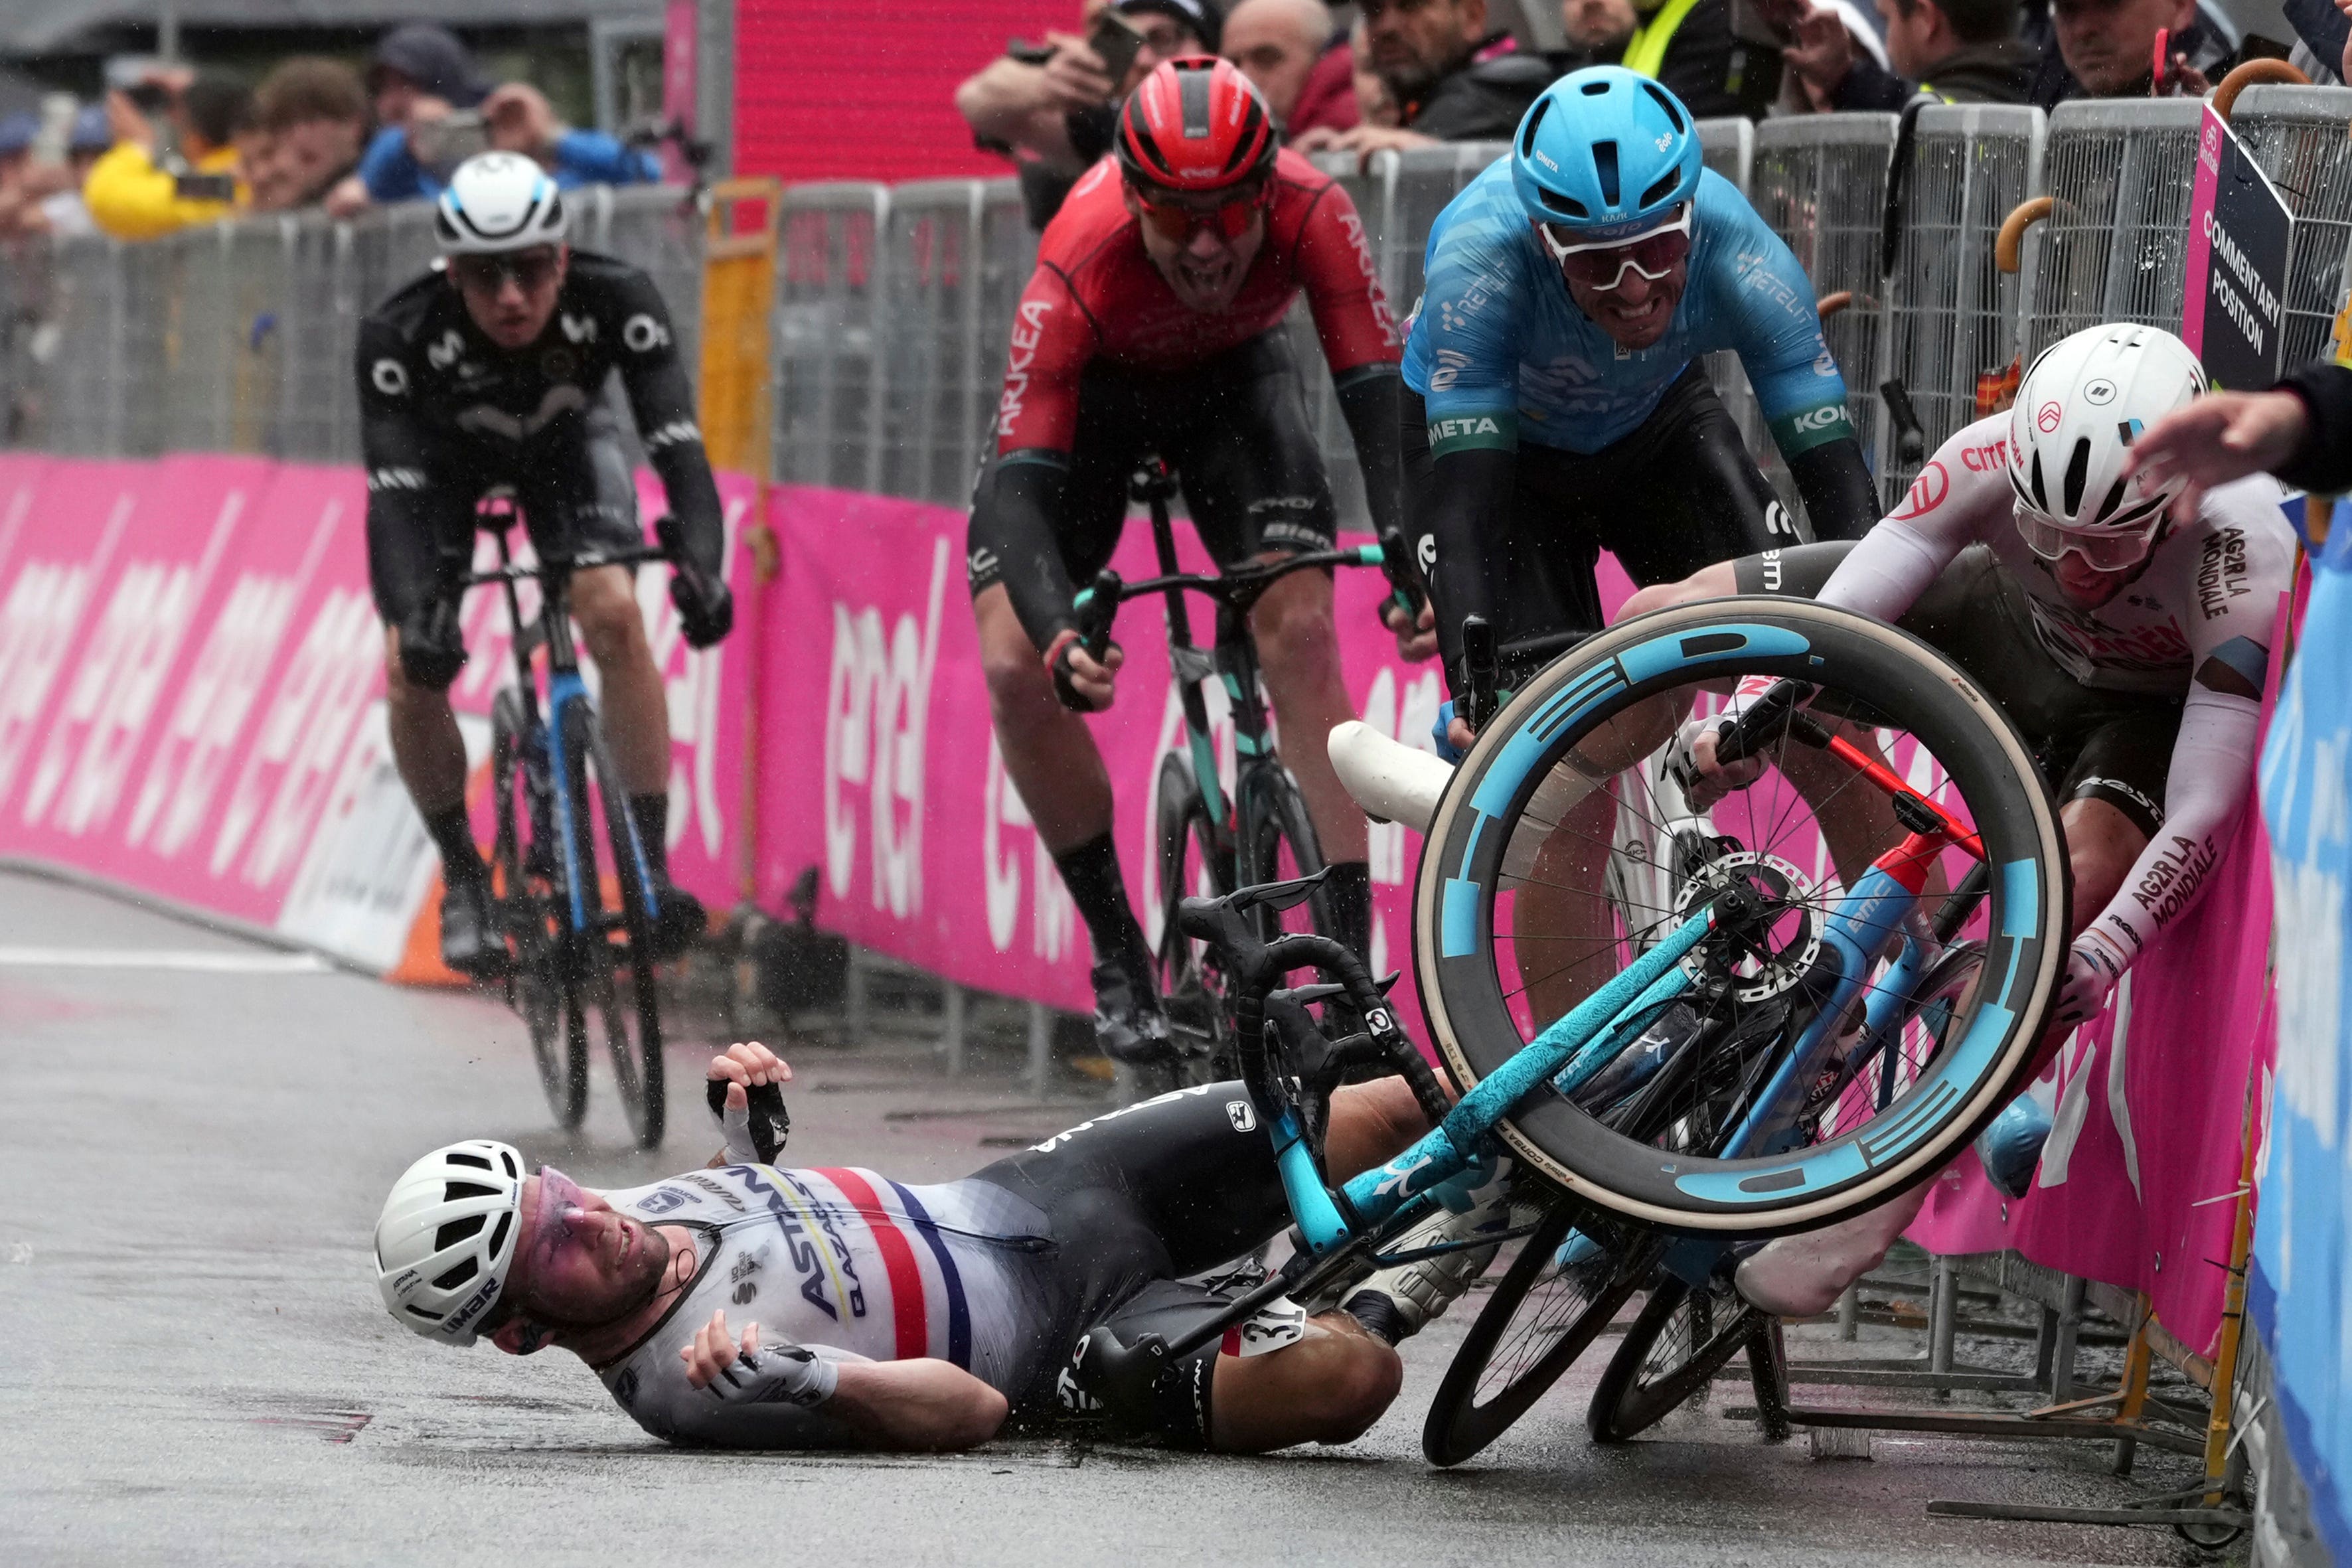 Mark Cavendish hit the deck hard but finished fifth after crossing the line on his backside